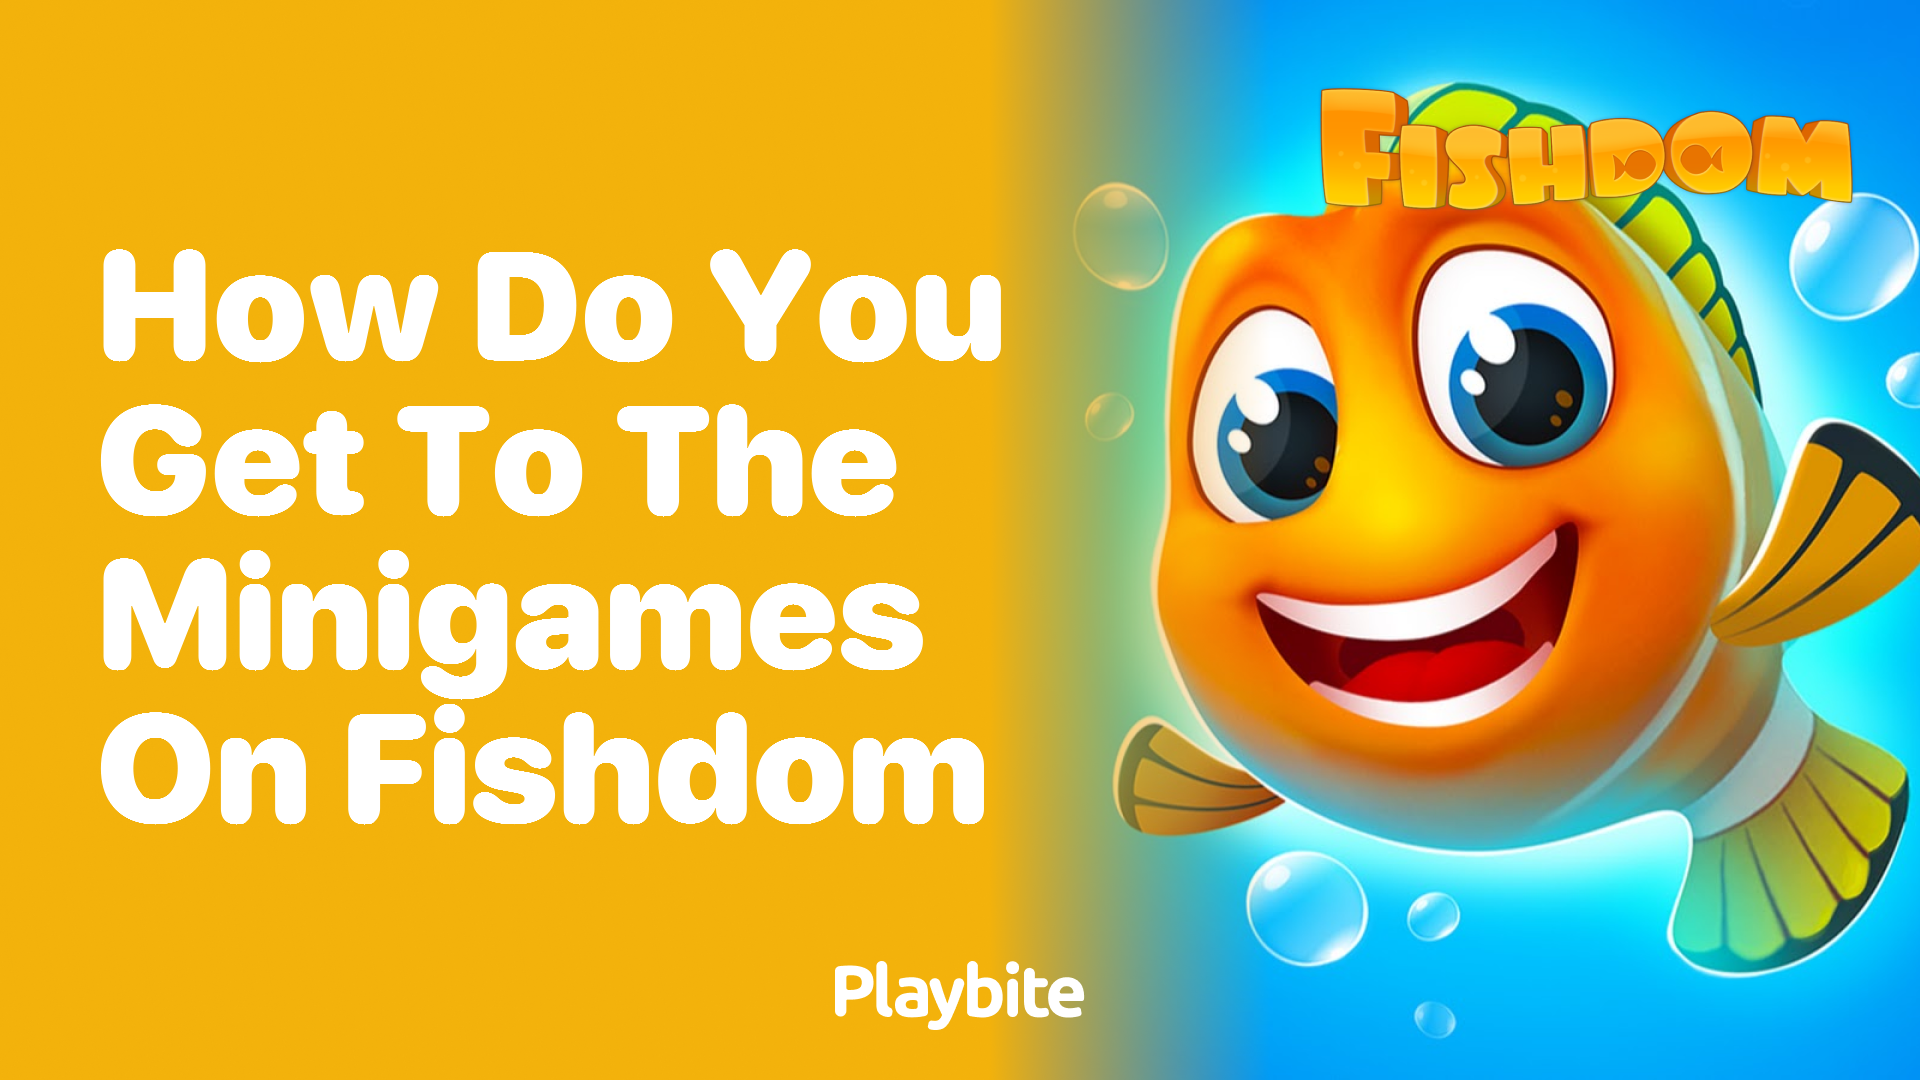 How Do You Get to the Minigames on Fishdom?